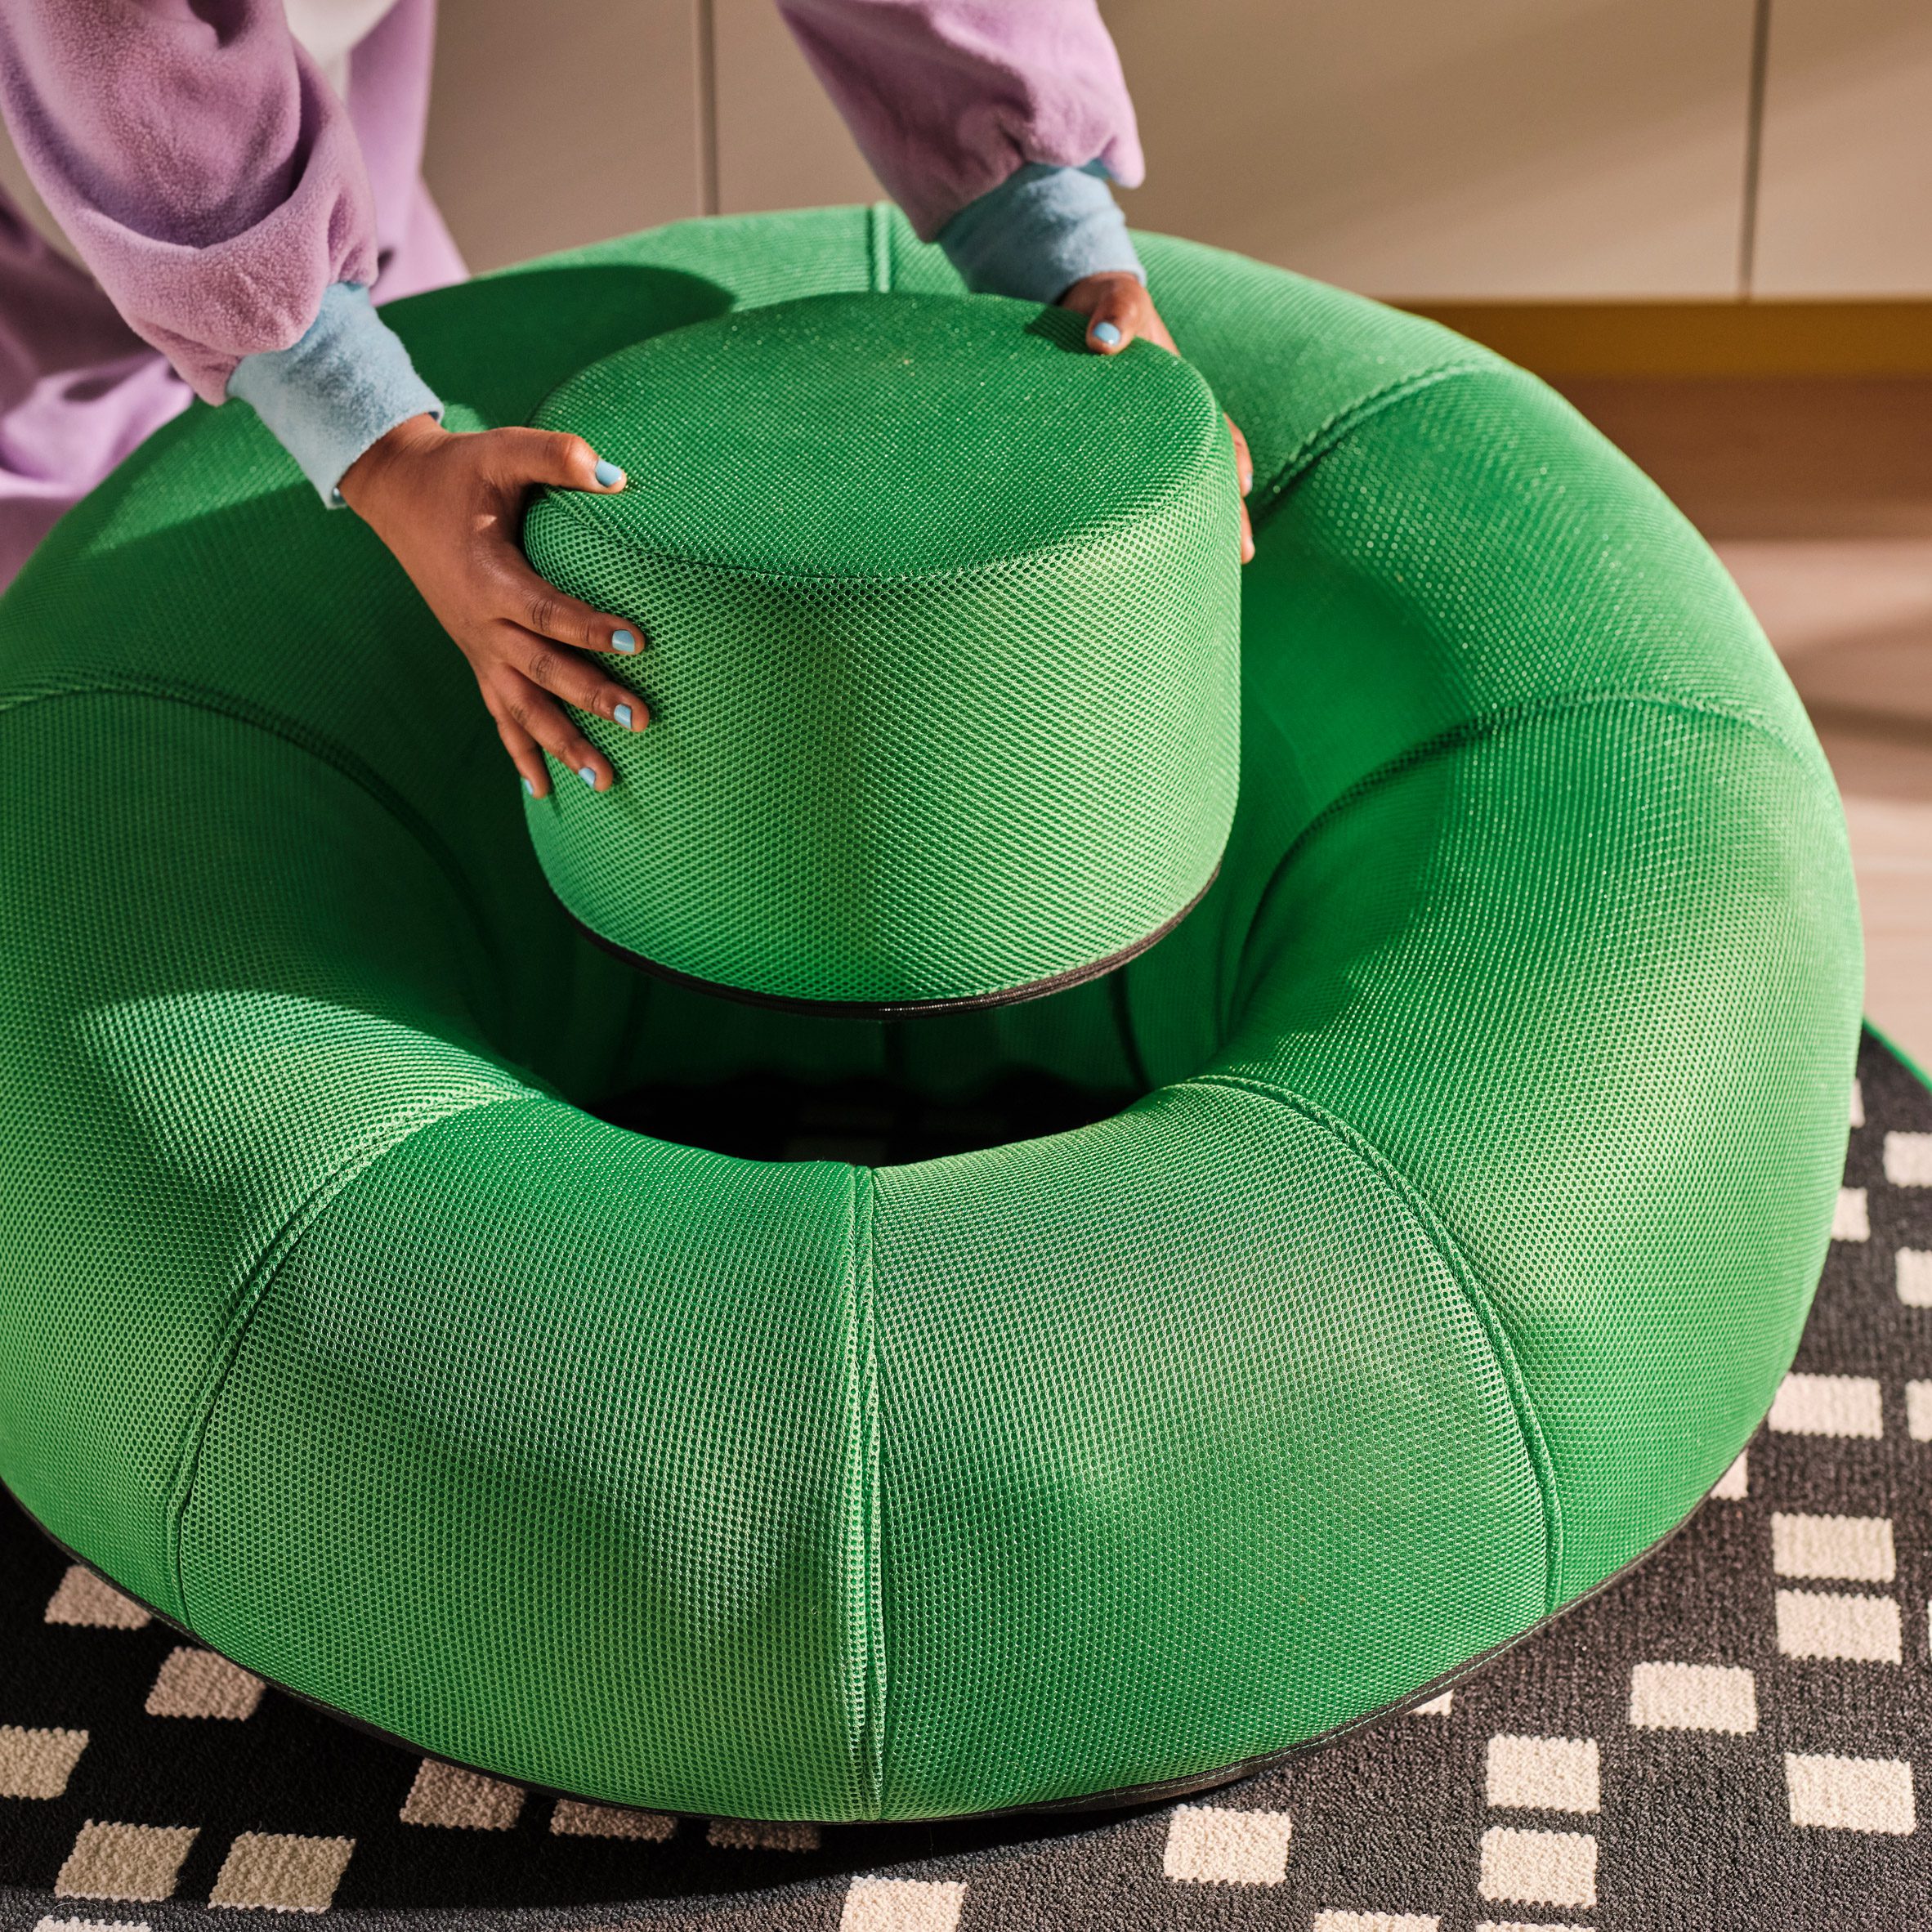 Inflatable green chair from Brännboll gaming furniture collection